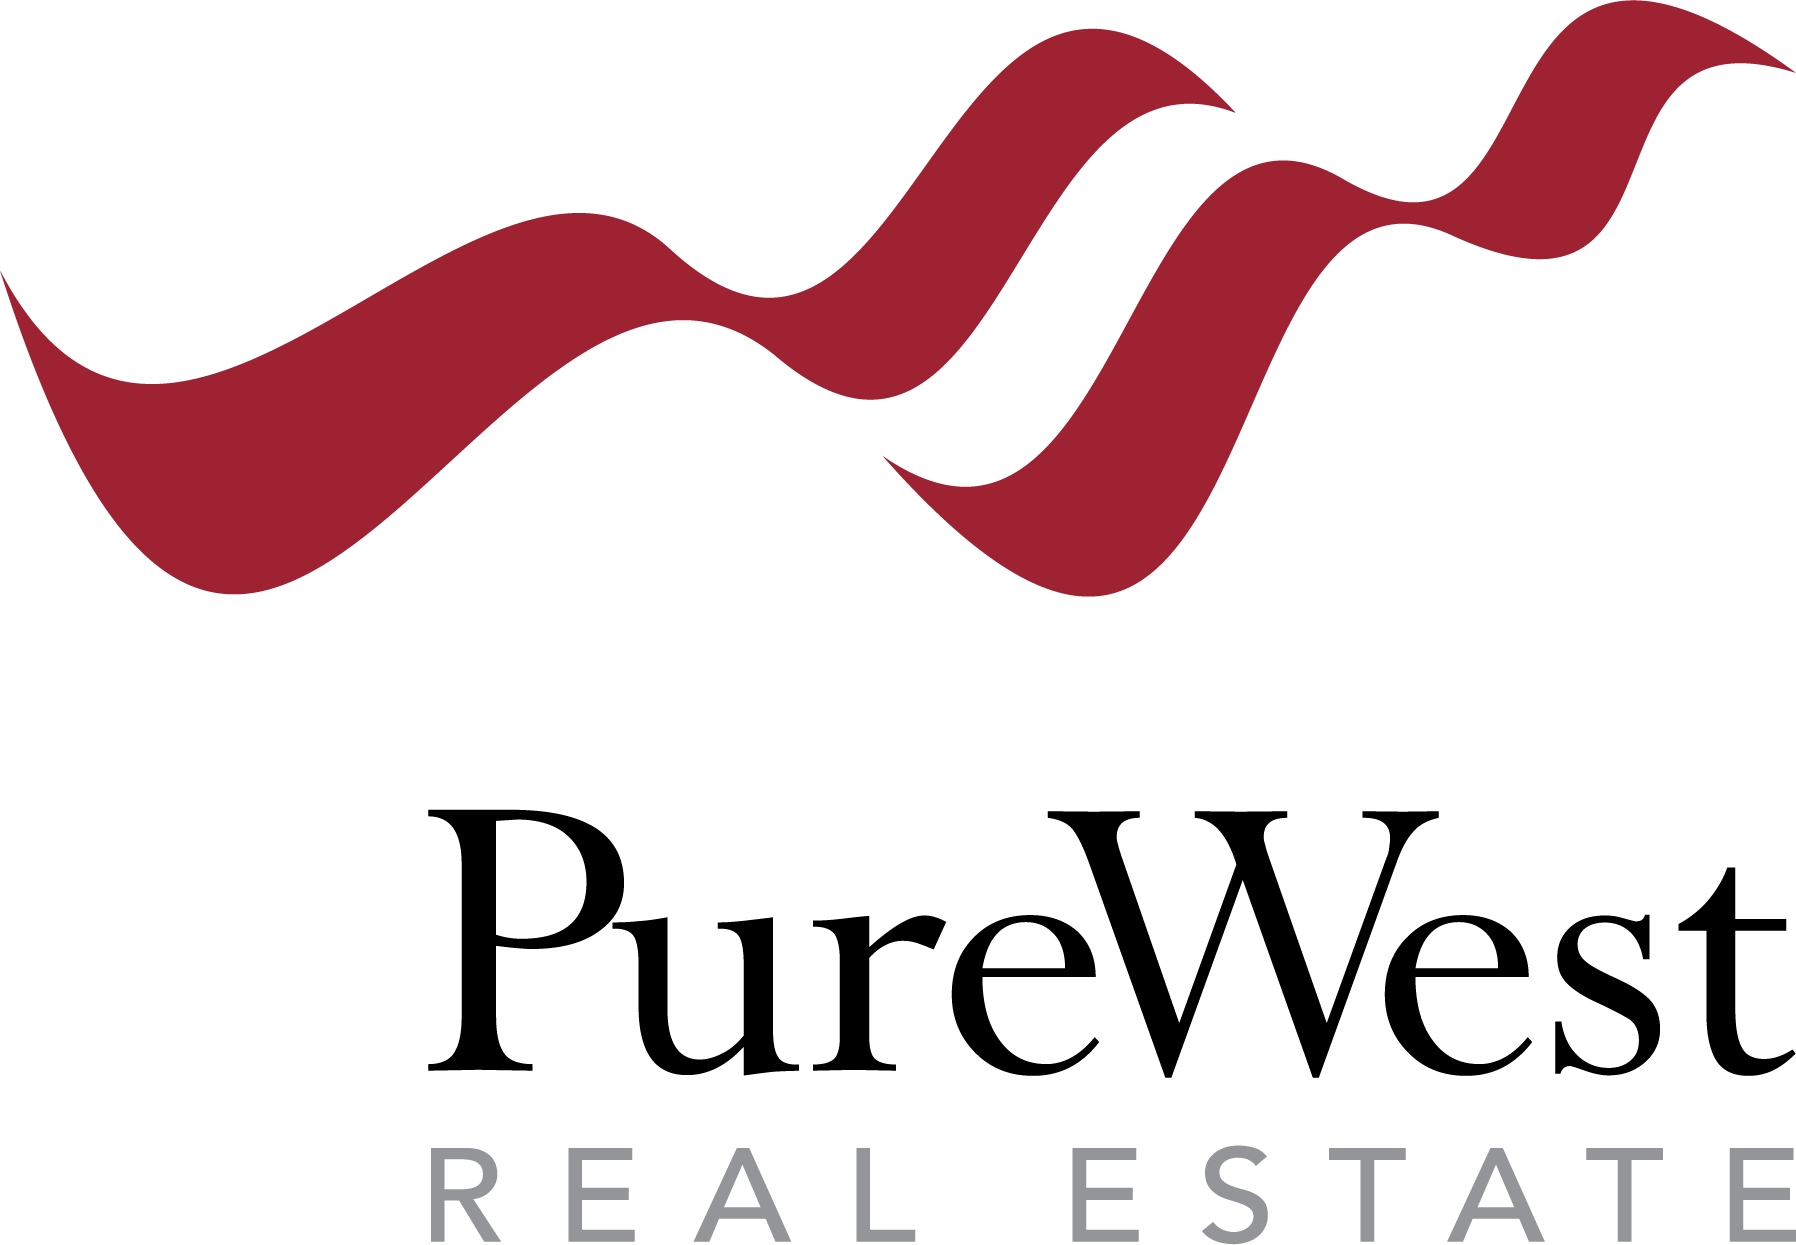 Dale Crosby Newman - Pure West Real Estate Logo